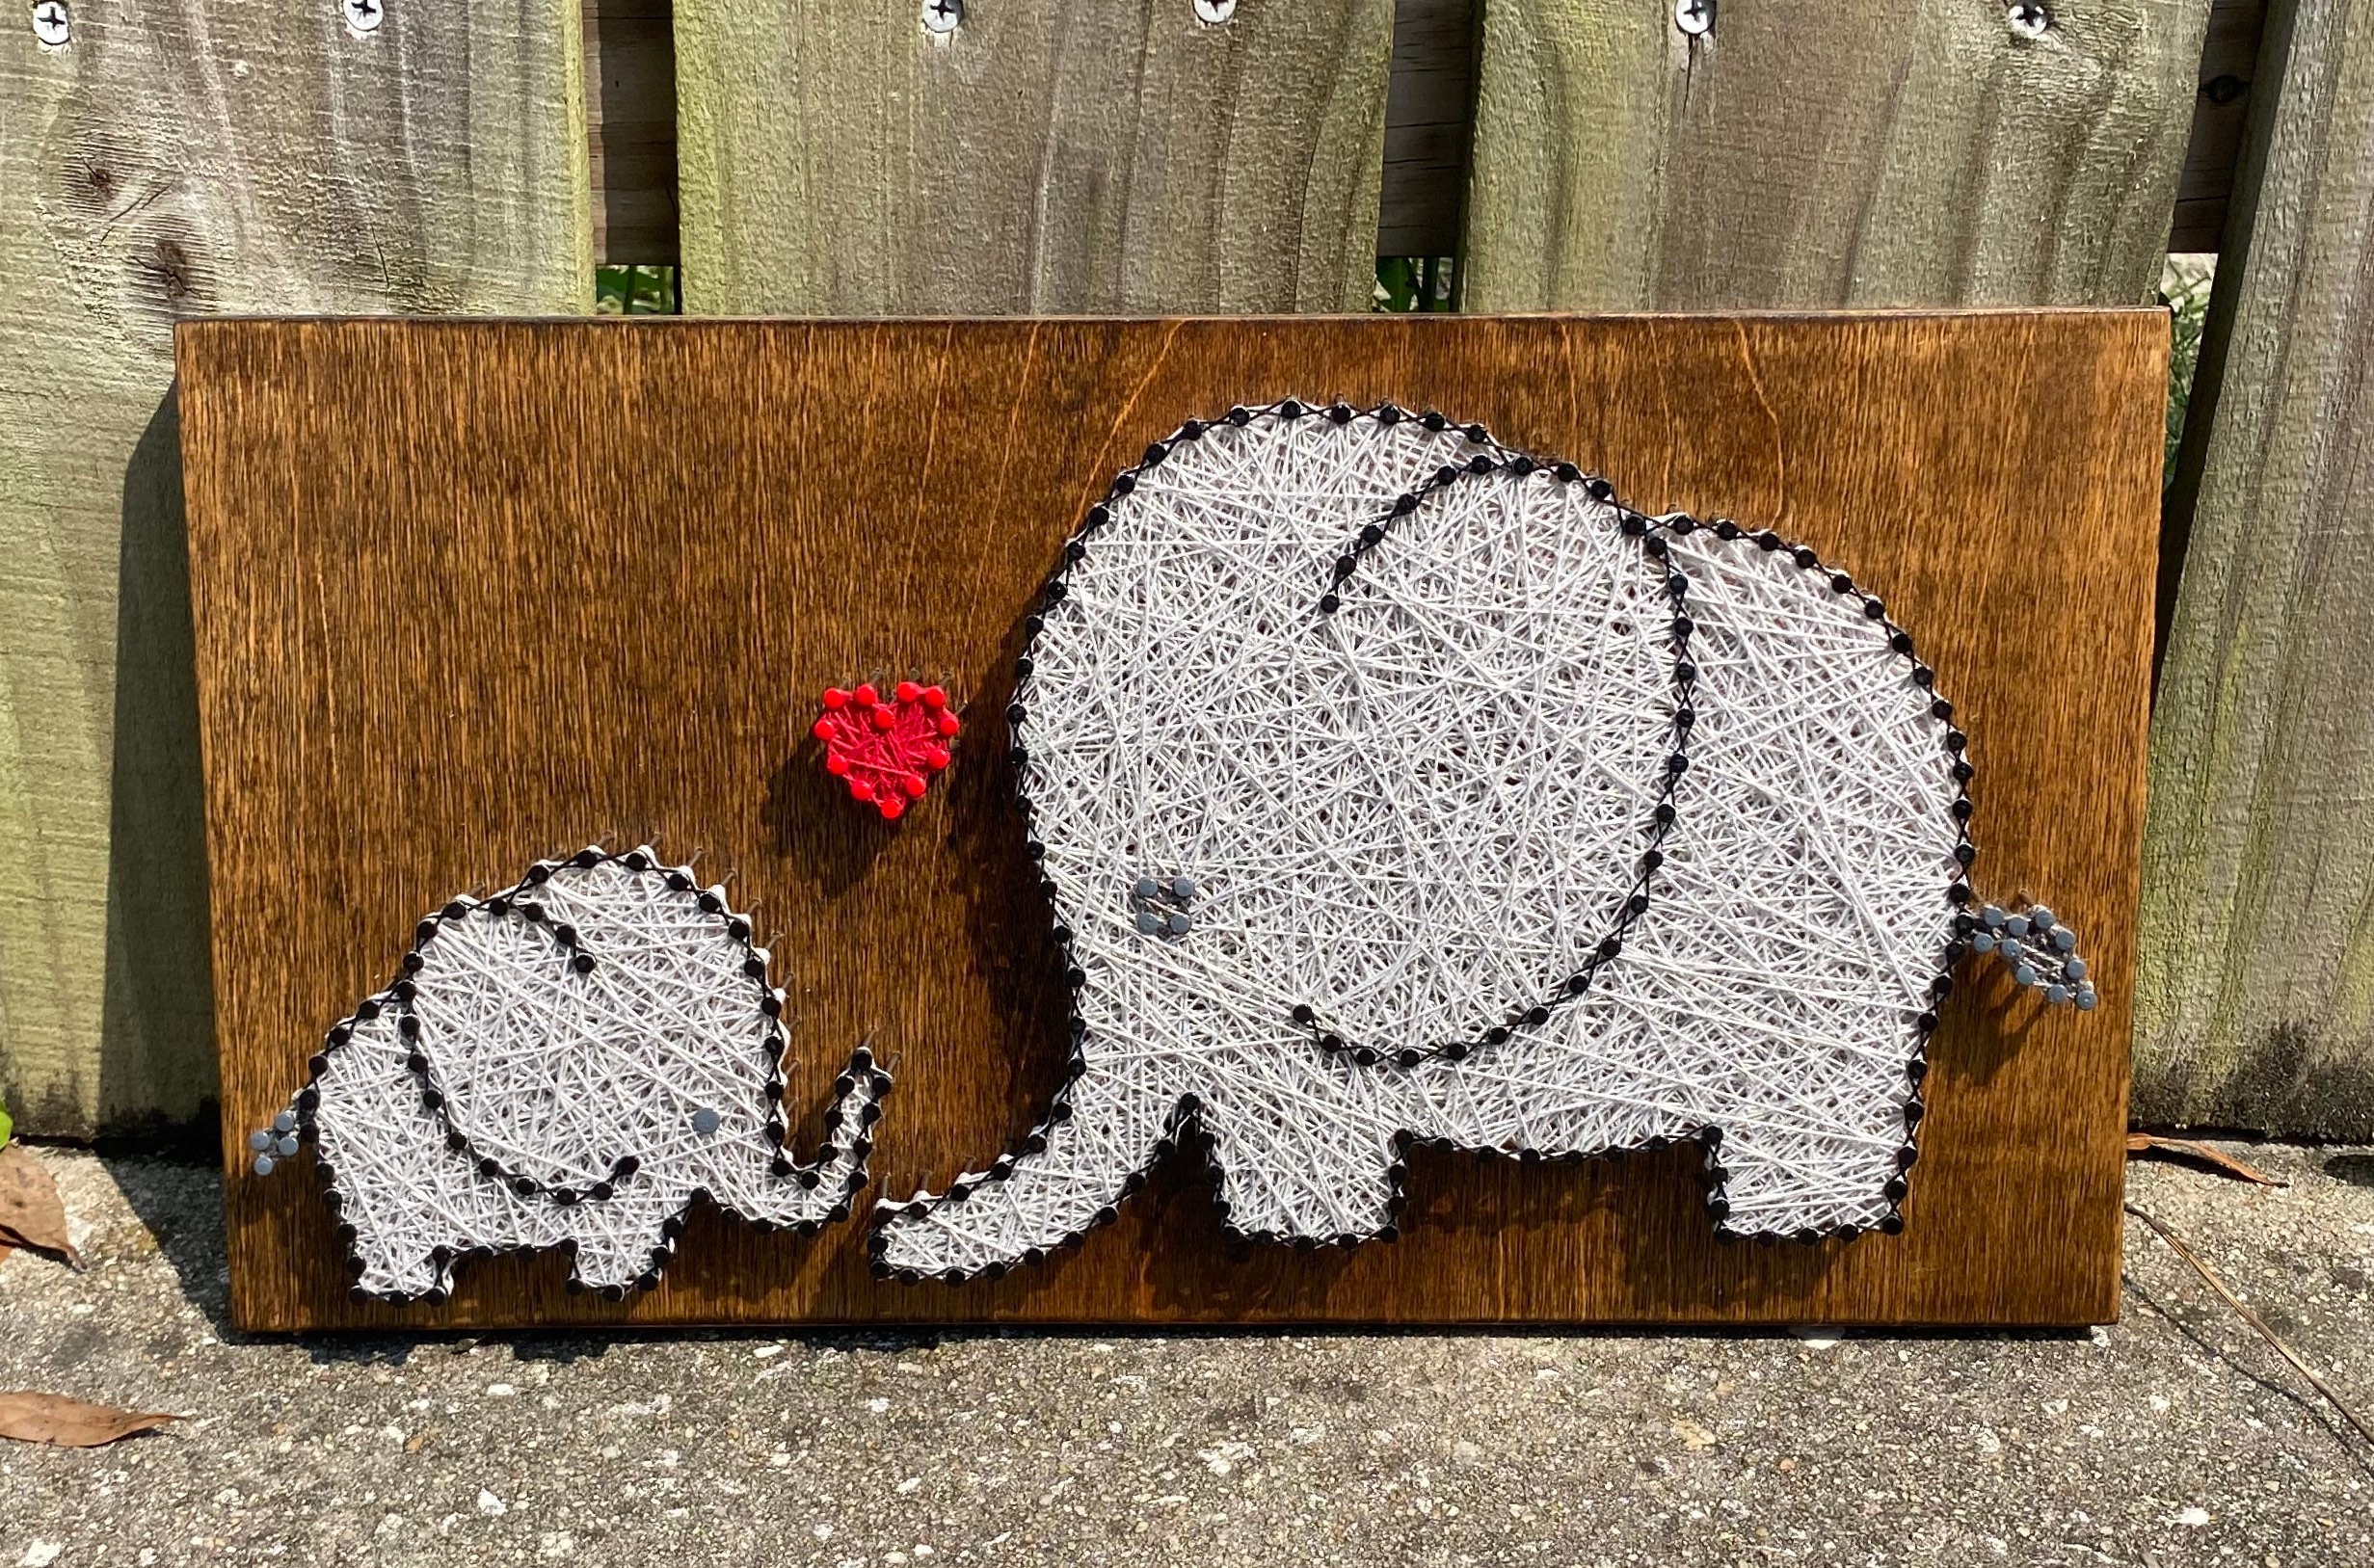 Wood Elephant String Nail Art Wall Hanging Frame Home Decoration